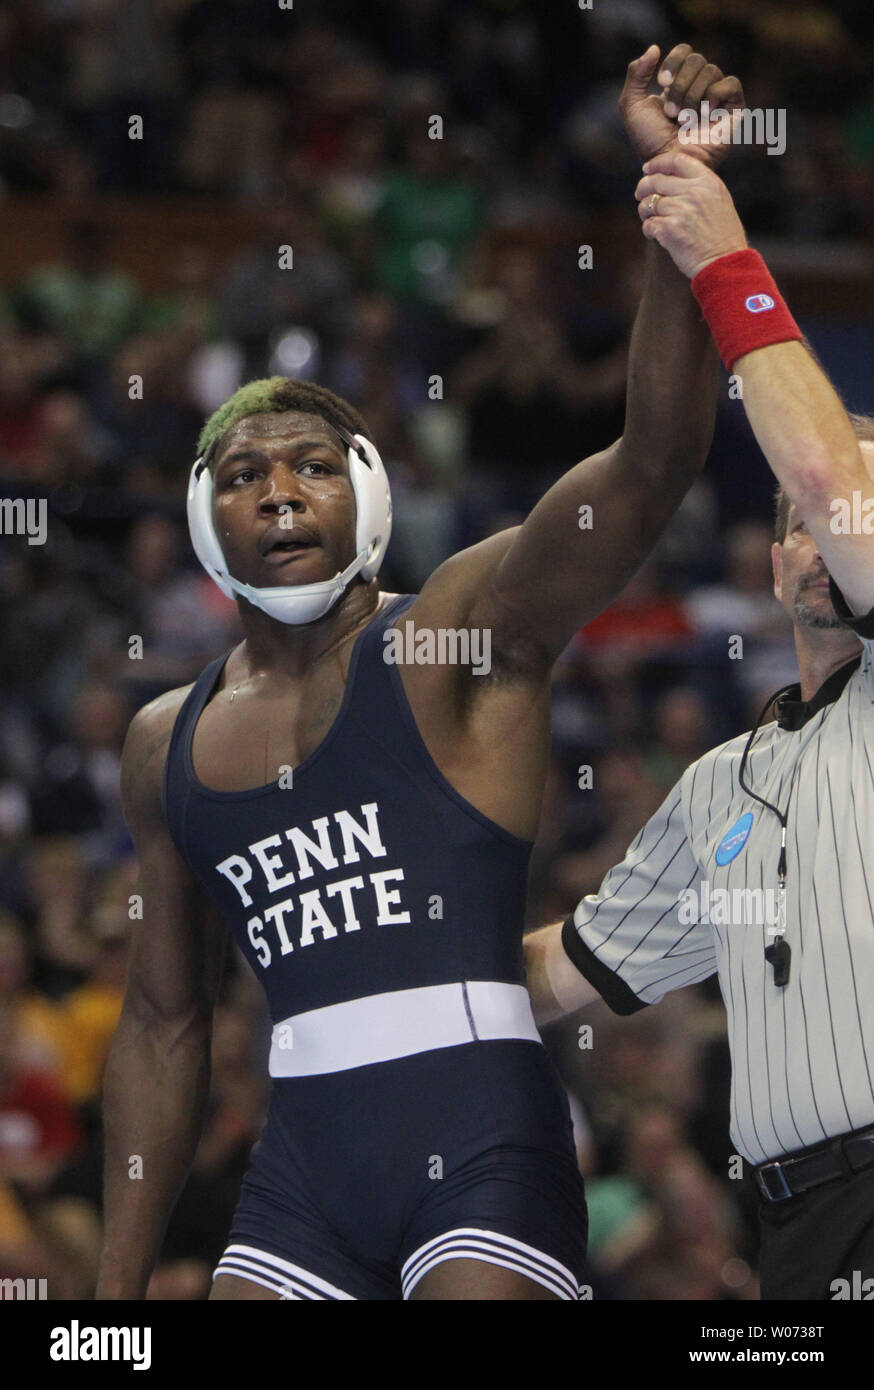 Edward Ruth of Penn State University is declared the winner after beating Nick Amuchasteg of Stanford in their 174 pound weight class match in the 2012 NCAA Division 1 Wrestling Championships at the Scottrade Center in St. Louis on March 17, 2012. UPI/Bill Greenblatt Stock Photo